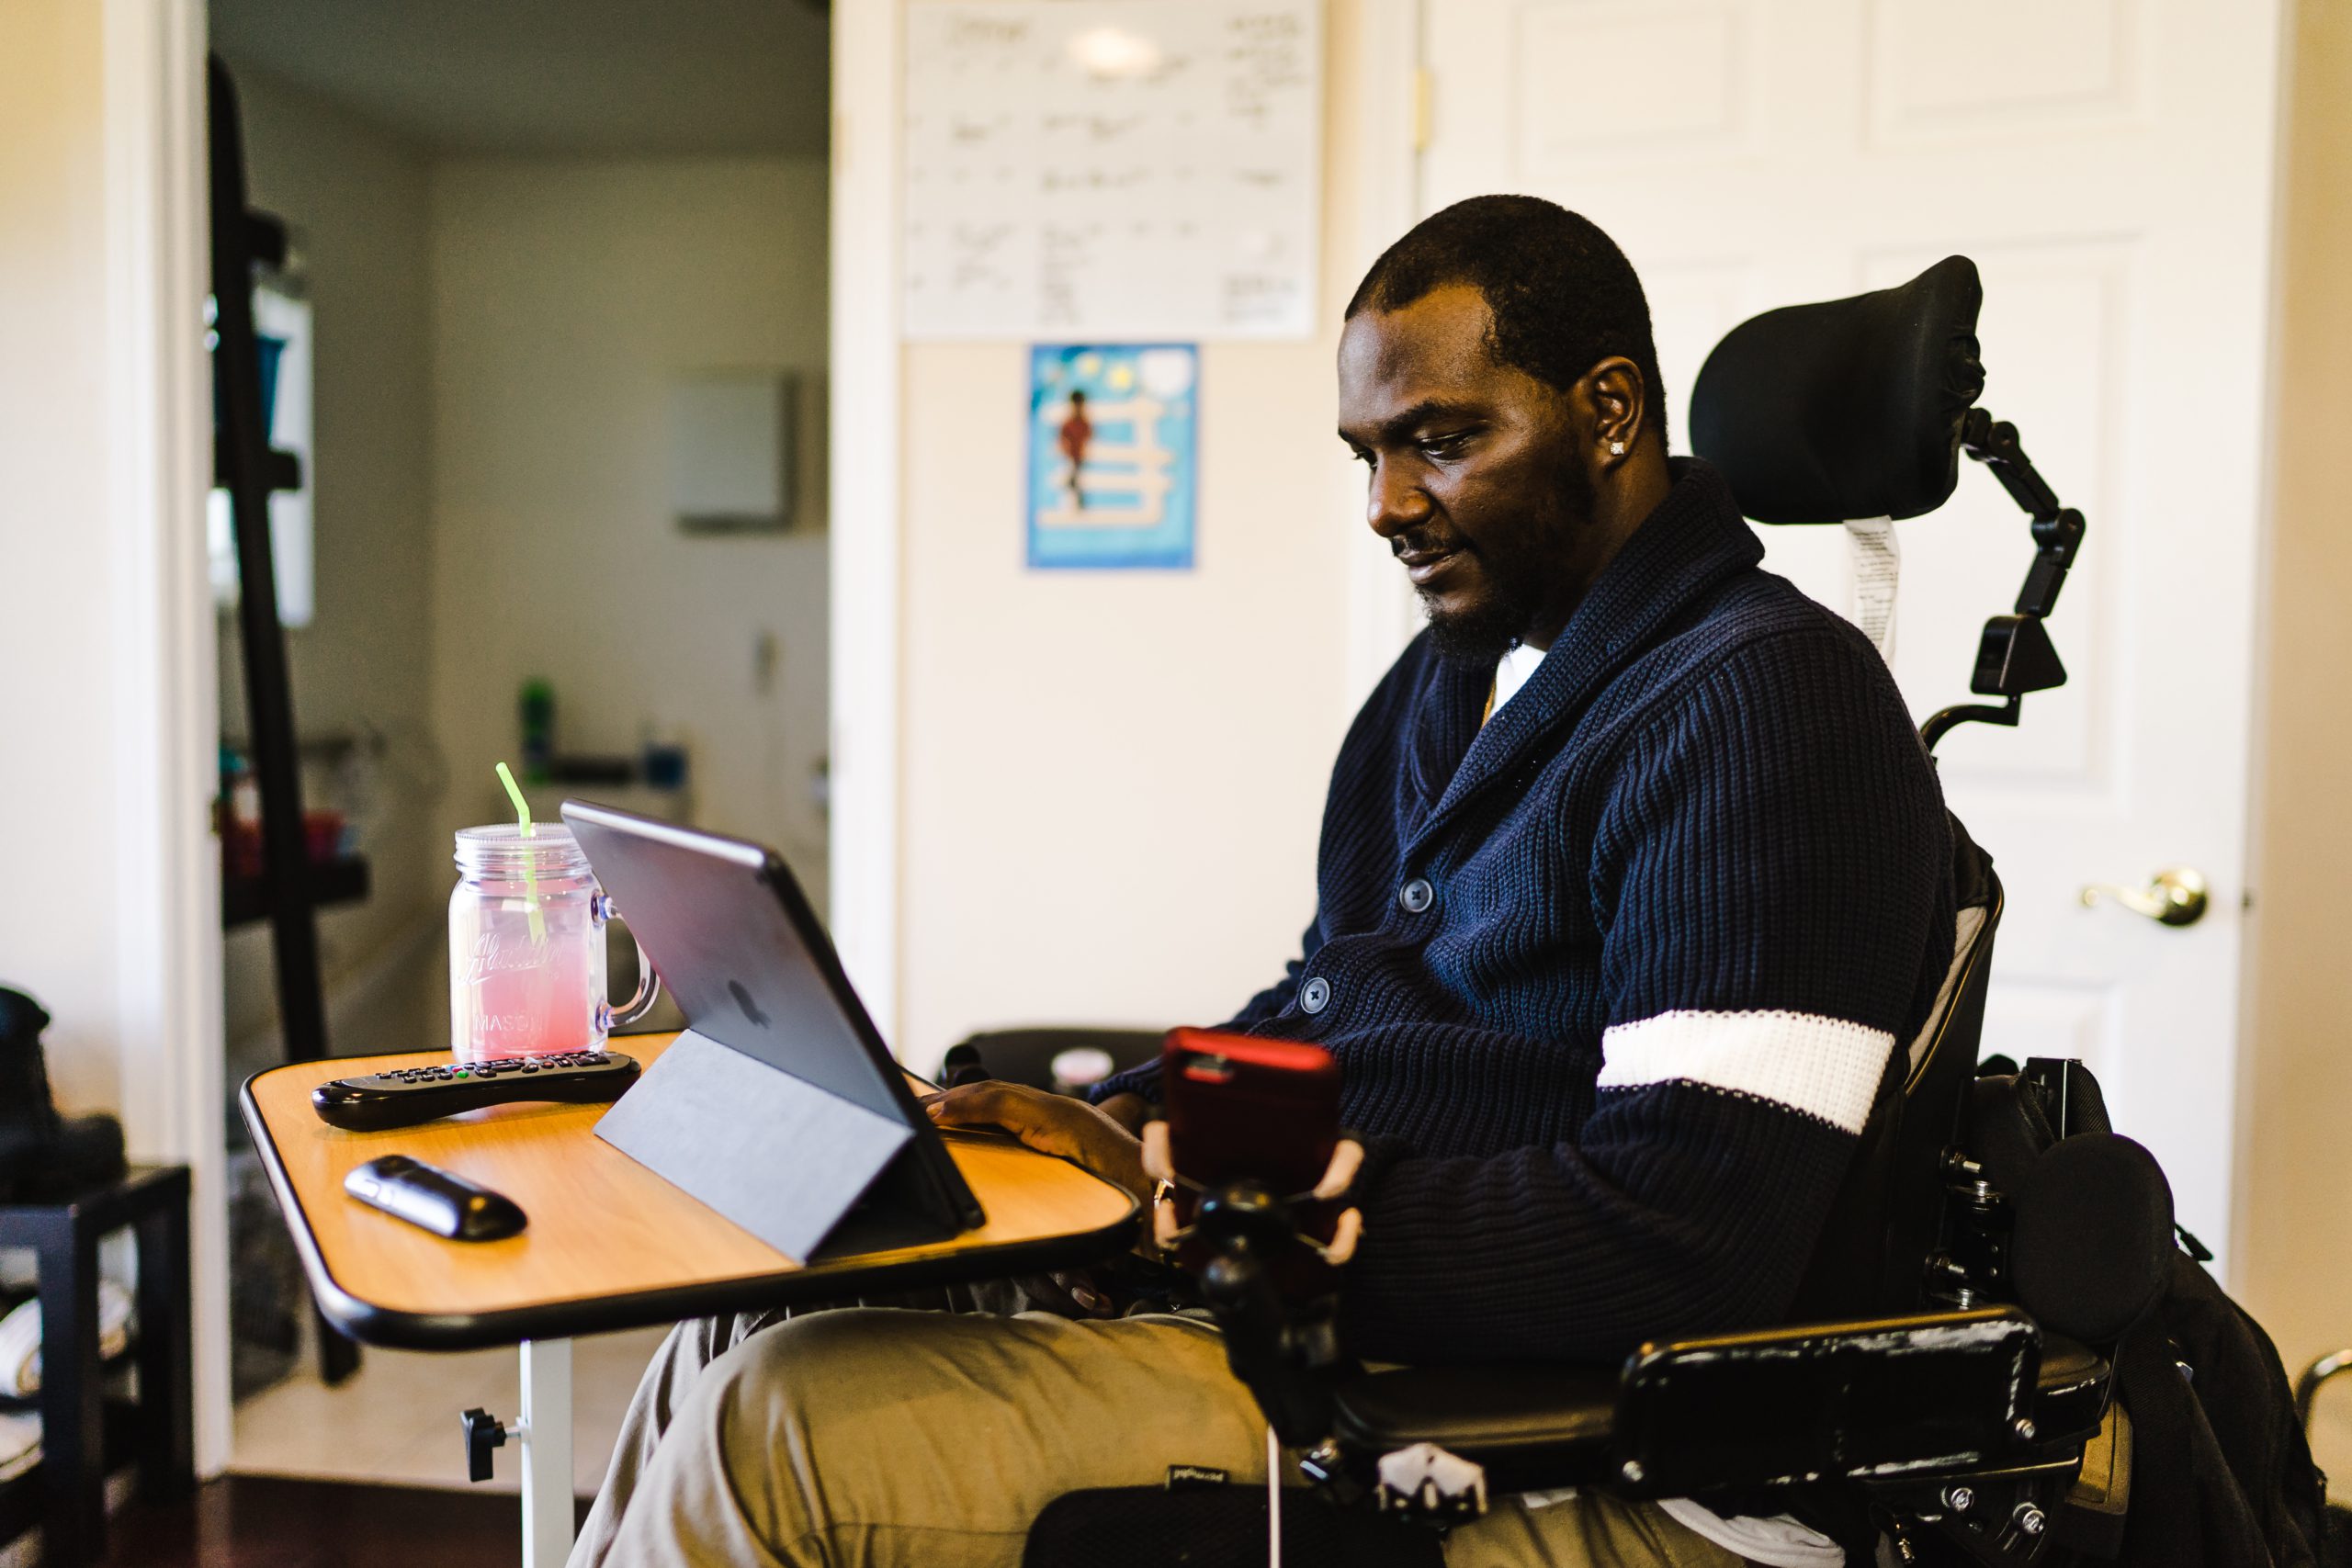 A Black man in a powered wheelchair sits at a table, watching a tablet.